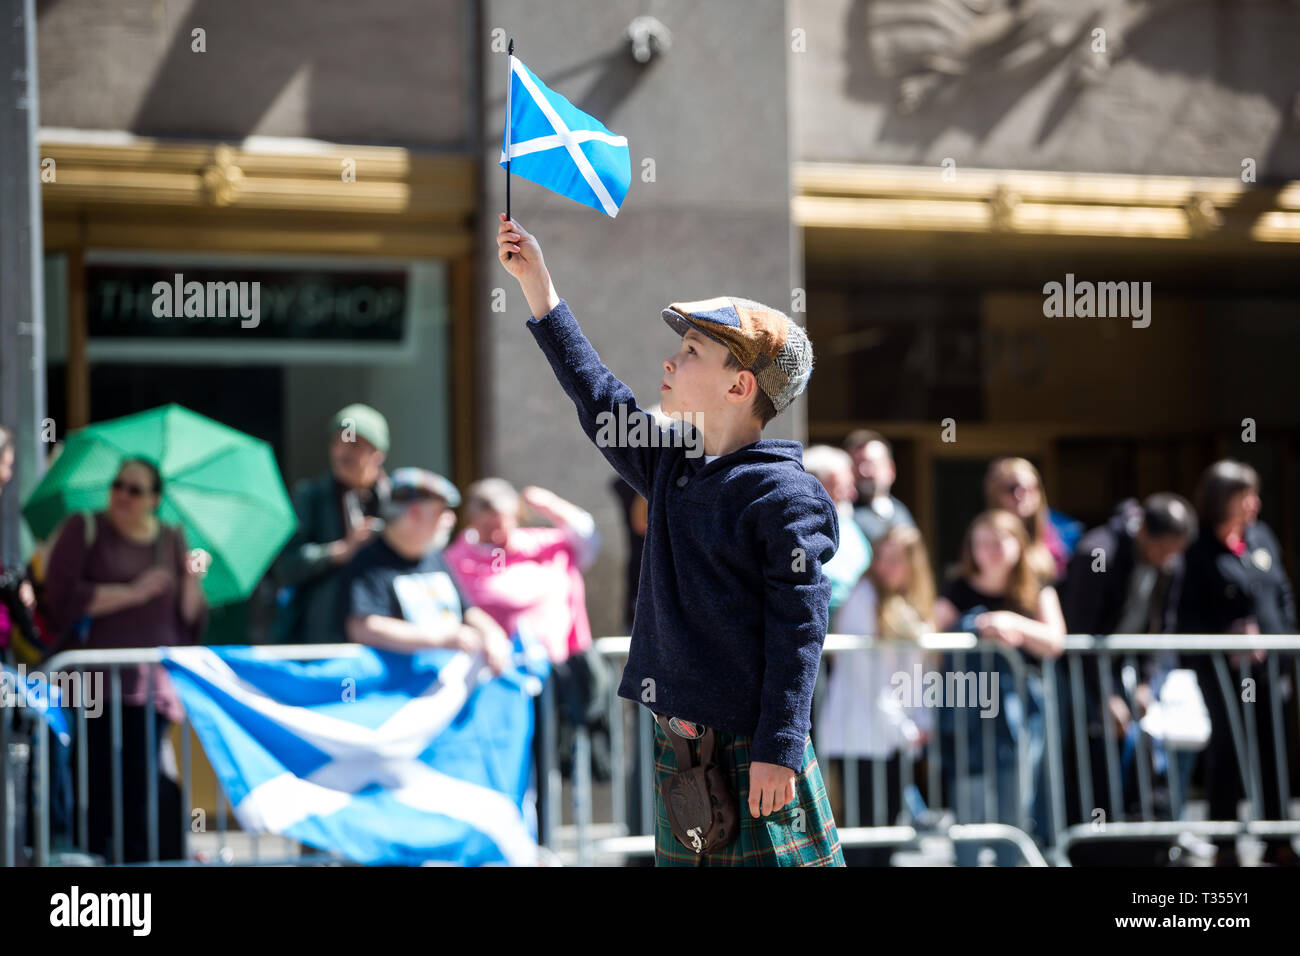 New York, USA. 6th Apr, 2019. A boy holds up a Scottish flag during the annual Tartan Day Parade in New York, the United States, on April 6, 2019. The parade, which consists of drummers, pipers and dancers, celebrated Scottish and Scottish American heritage. In 1998 the U.S. Senate declared April 6 to be National Tartan Day to recognize the contributions made by Scottish Americans to the United States. Credit: Michael Nagle/Xinhua/Alamy Live News Stock Photo